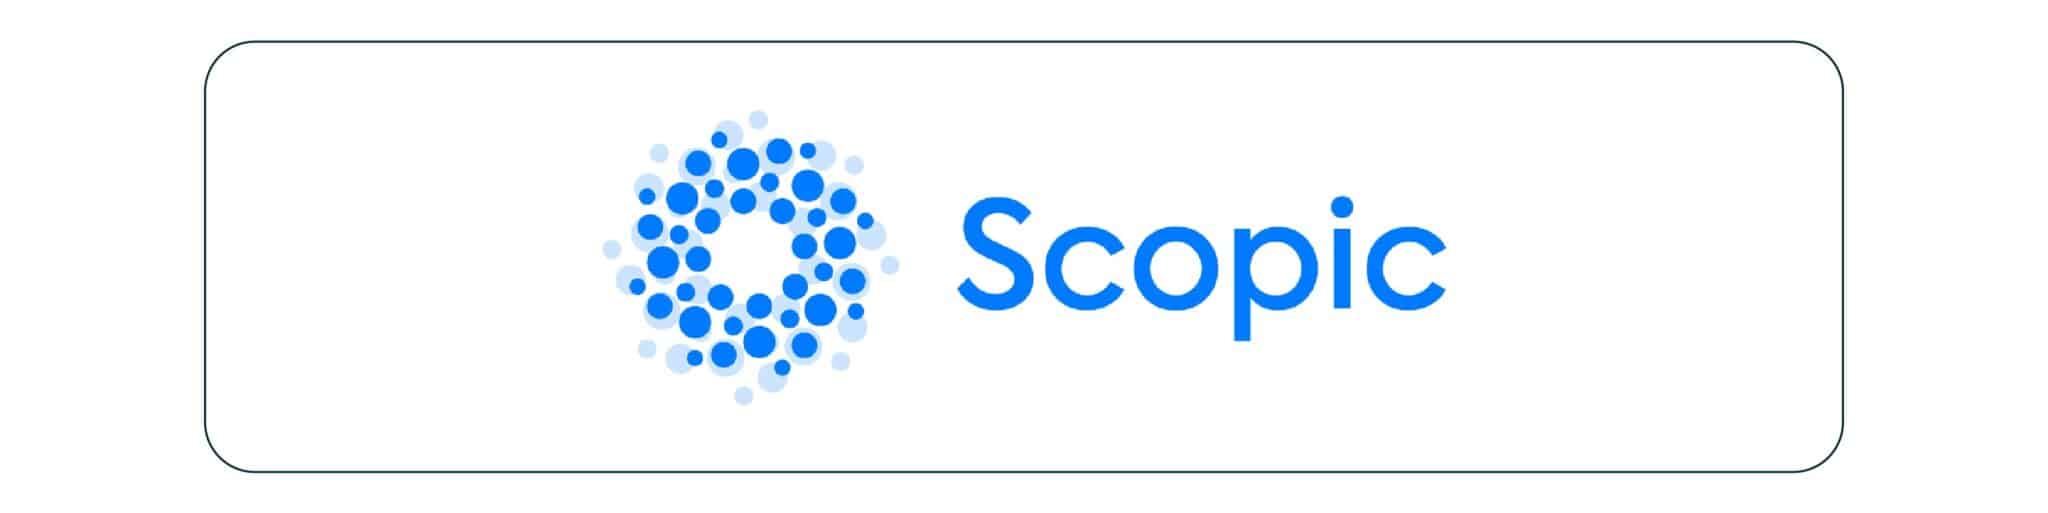 Scopic is the best SaaS development company on the US market